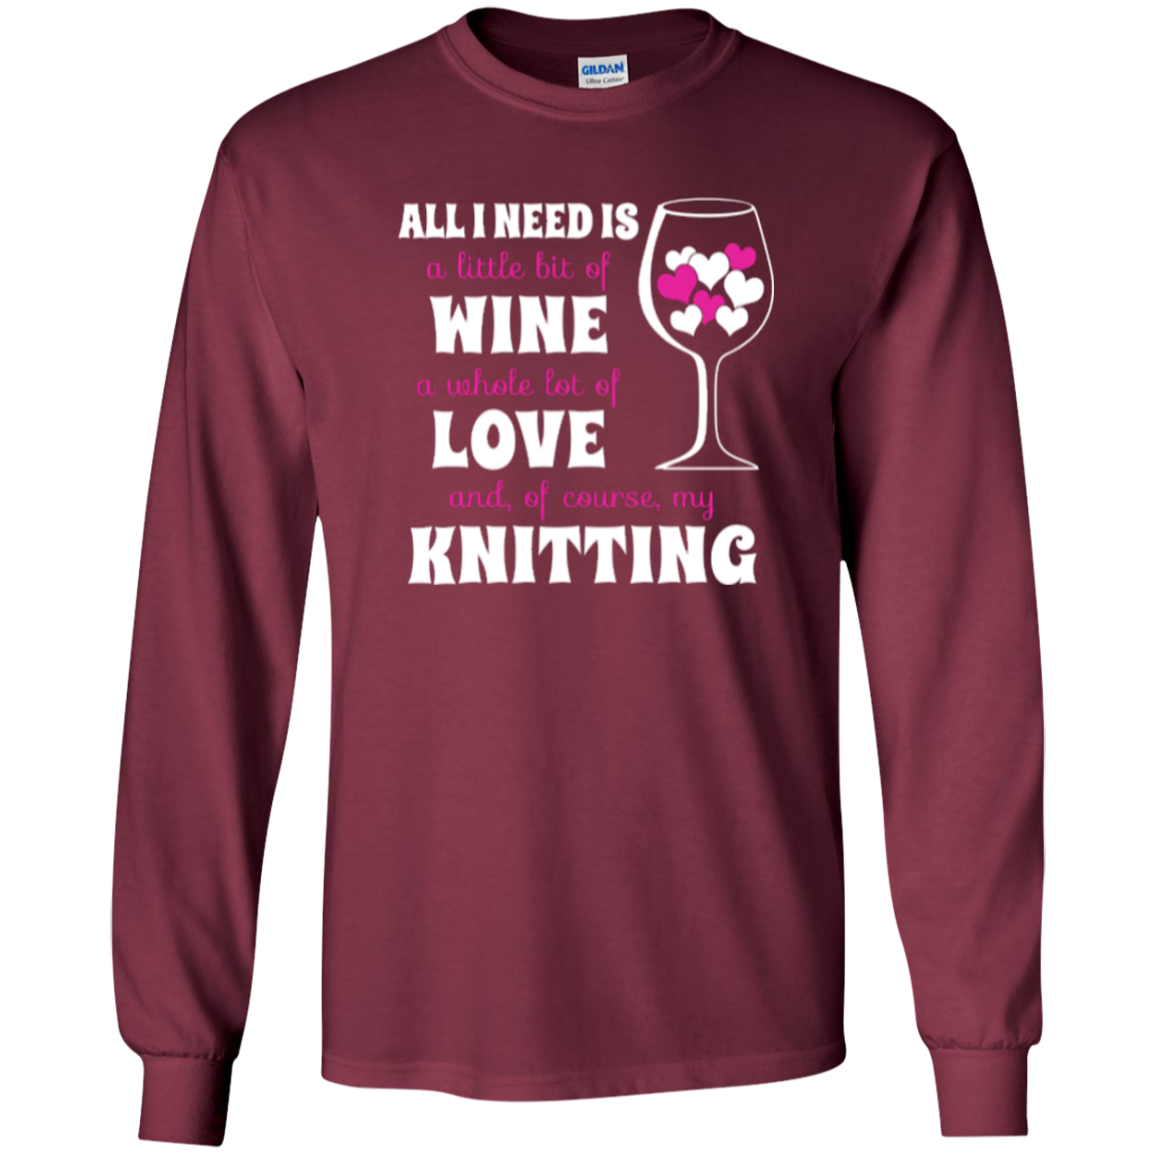 All I Need is Wine-Love-Knitting Long Sleeve Ultra Cotton Tshirt - Crafter4Life - 10